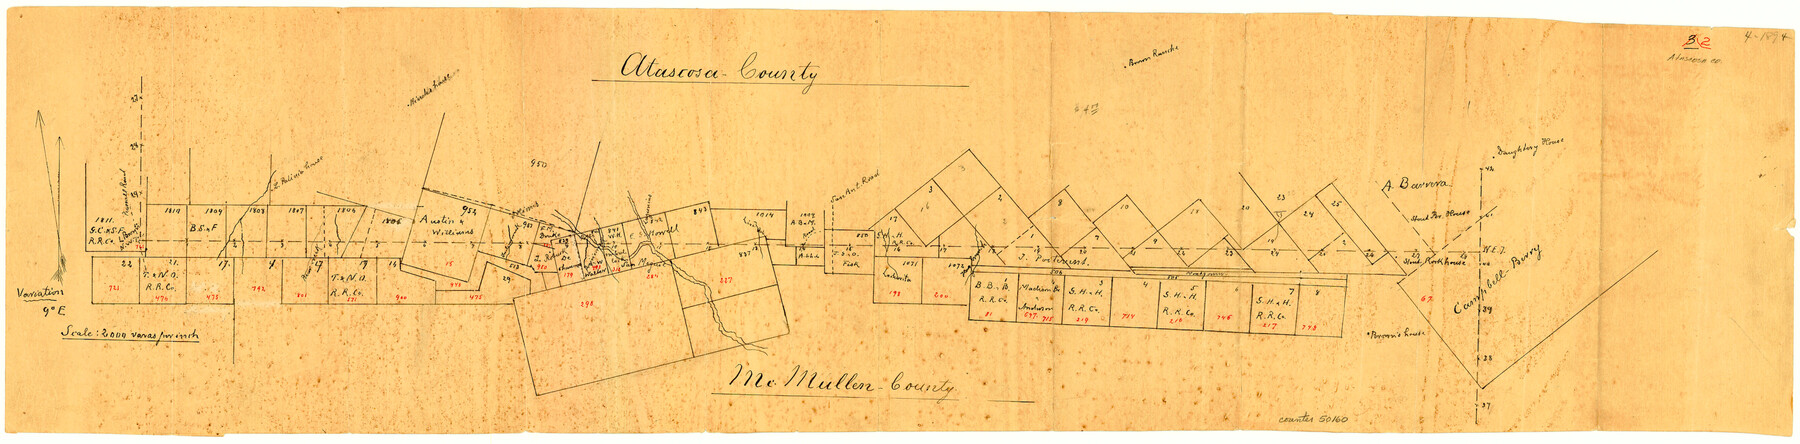 50160, Atascosa County Boundary File 2, General Map Collection